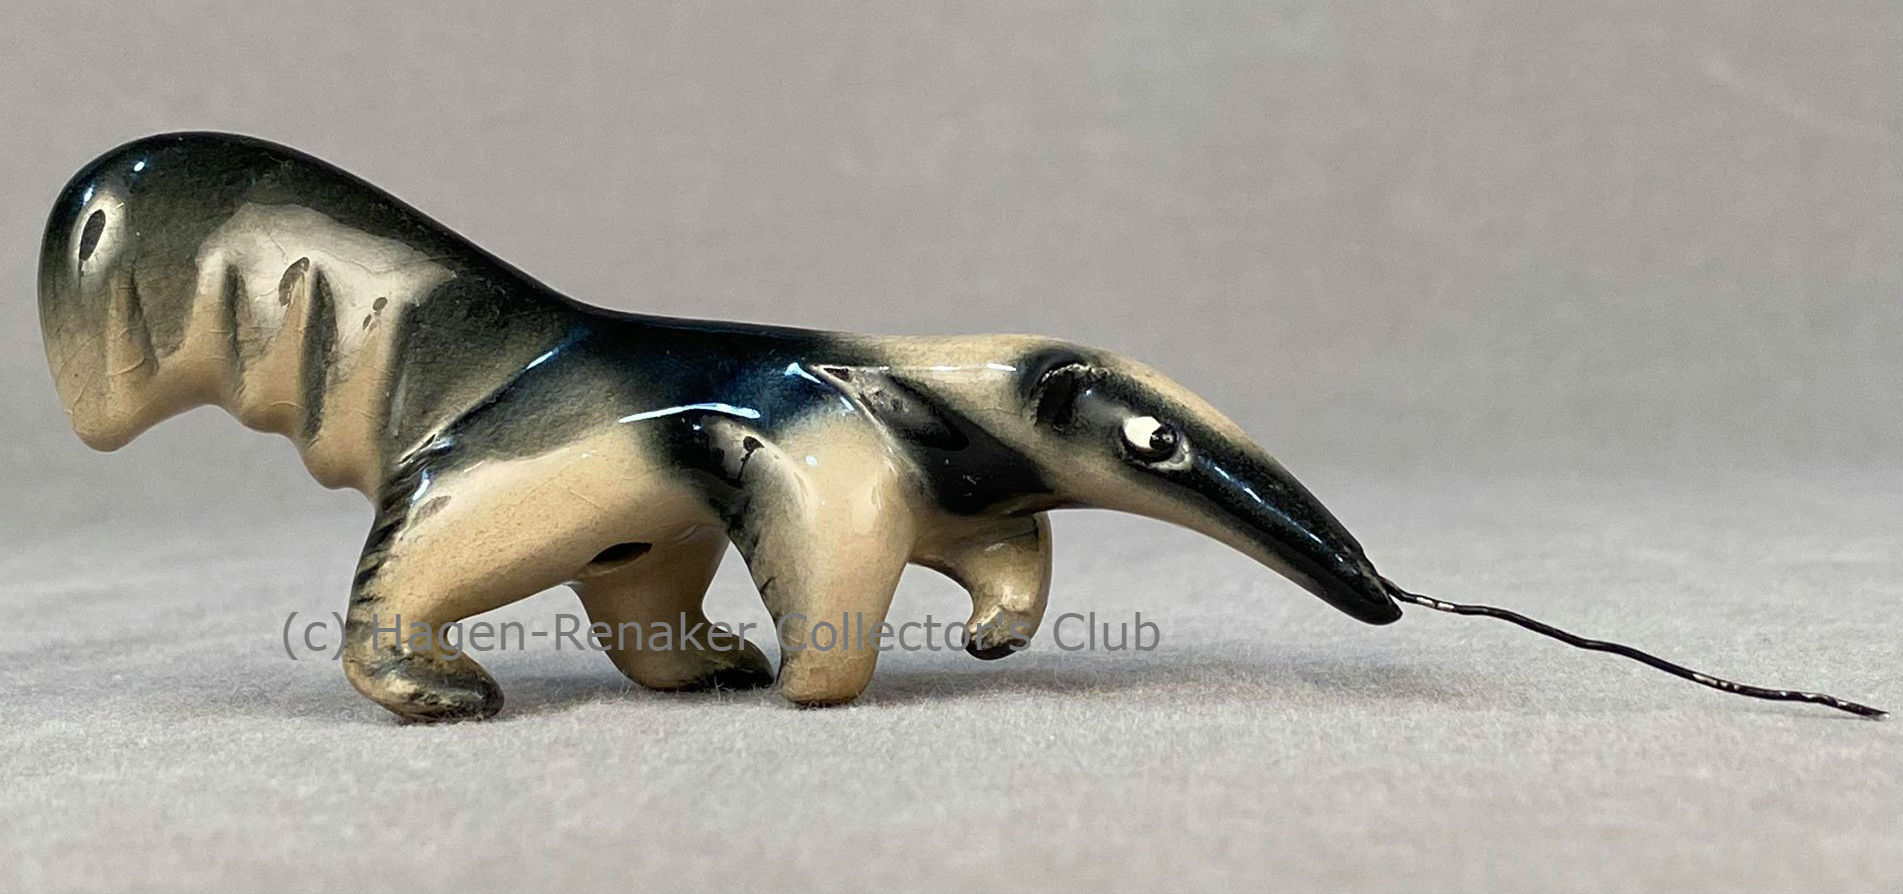 Anteater-image